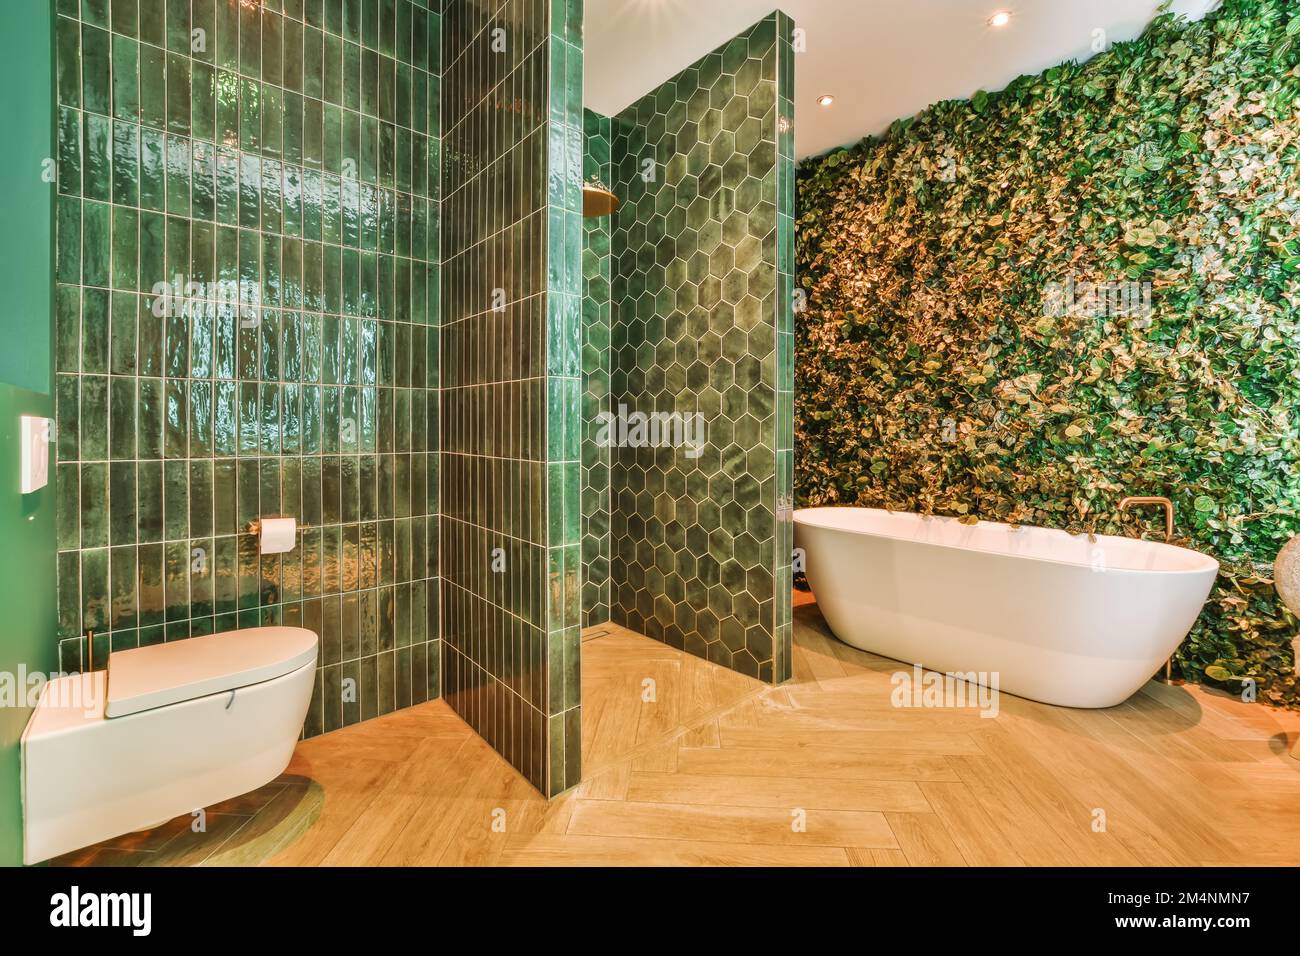 a bathroom with green tiles on the walls and wood flooring around the tub, toilet, and bathtub Stock Photo